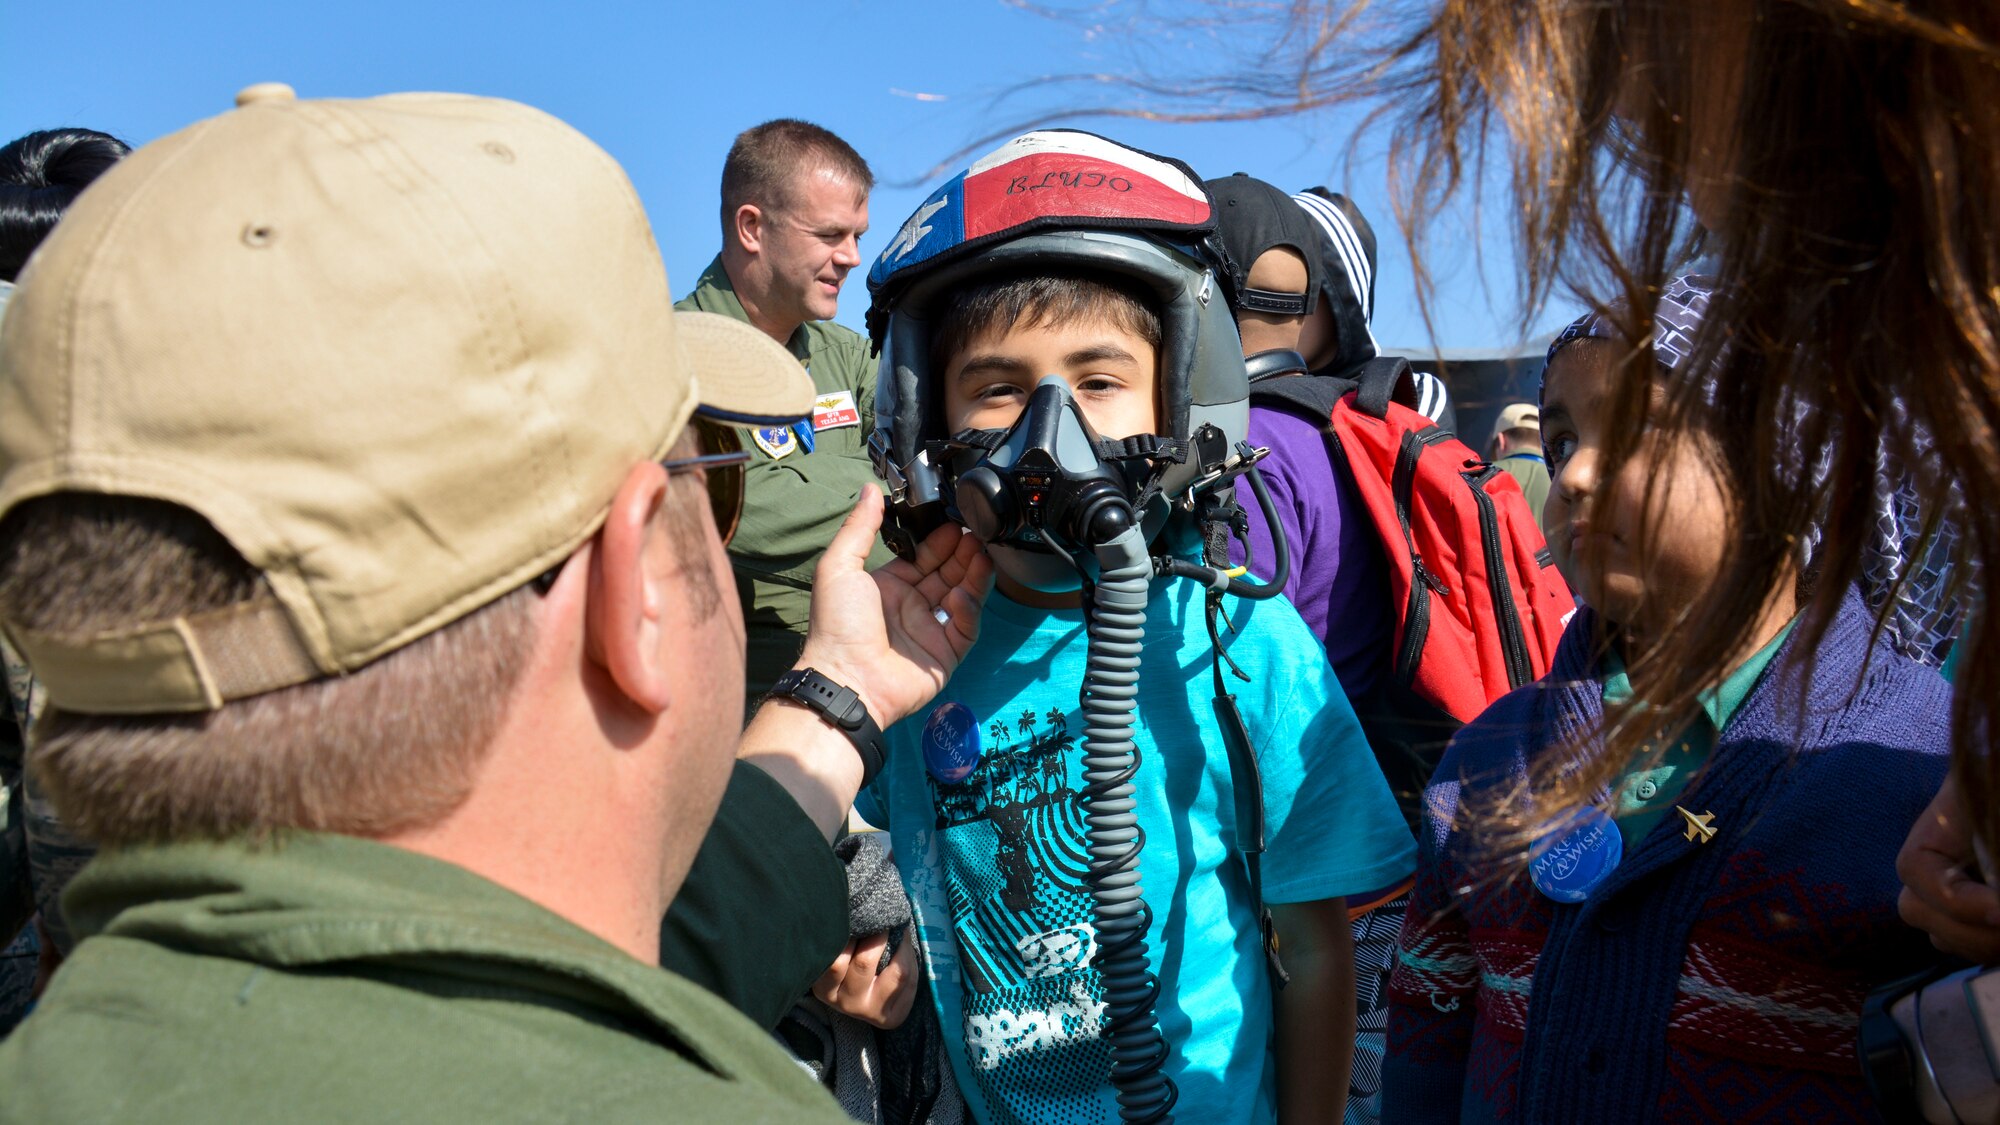 Lt. Col. Greg Pohoski (far left), a fighter pilot assigned to the Texas Air National Guard, helps a Chilean boy from the Make-A-Wish Foundation try on a helmet and oxygen mask at the FIDAE Air Show in Santiago, Chile, March 26. Nearly 60 U.S. airmen are participating in subject matter expert exchanges with Chilean air force counterparts during FIDAE, and as part of the events are hosting static displays of the C-130 Hercules and F-16 Fighting Falcon. Airmen from the Texas Air National Guard set aside time to host the children before the public days of FIDAE, which are scheduled for the weekend. (U.S. Air Force photo by Capt. Justin Brockhoff/Released)